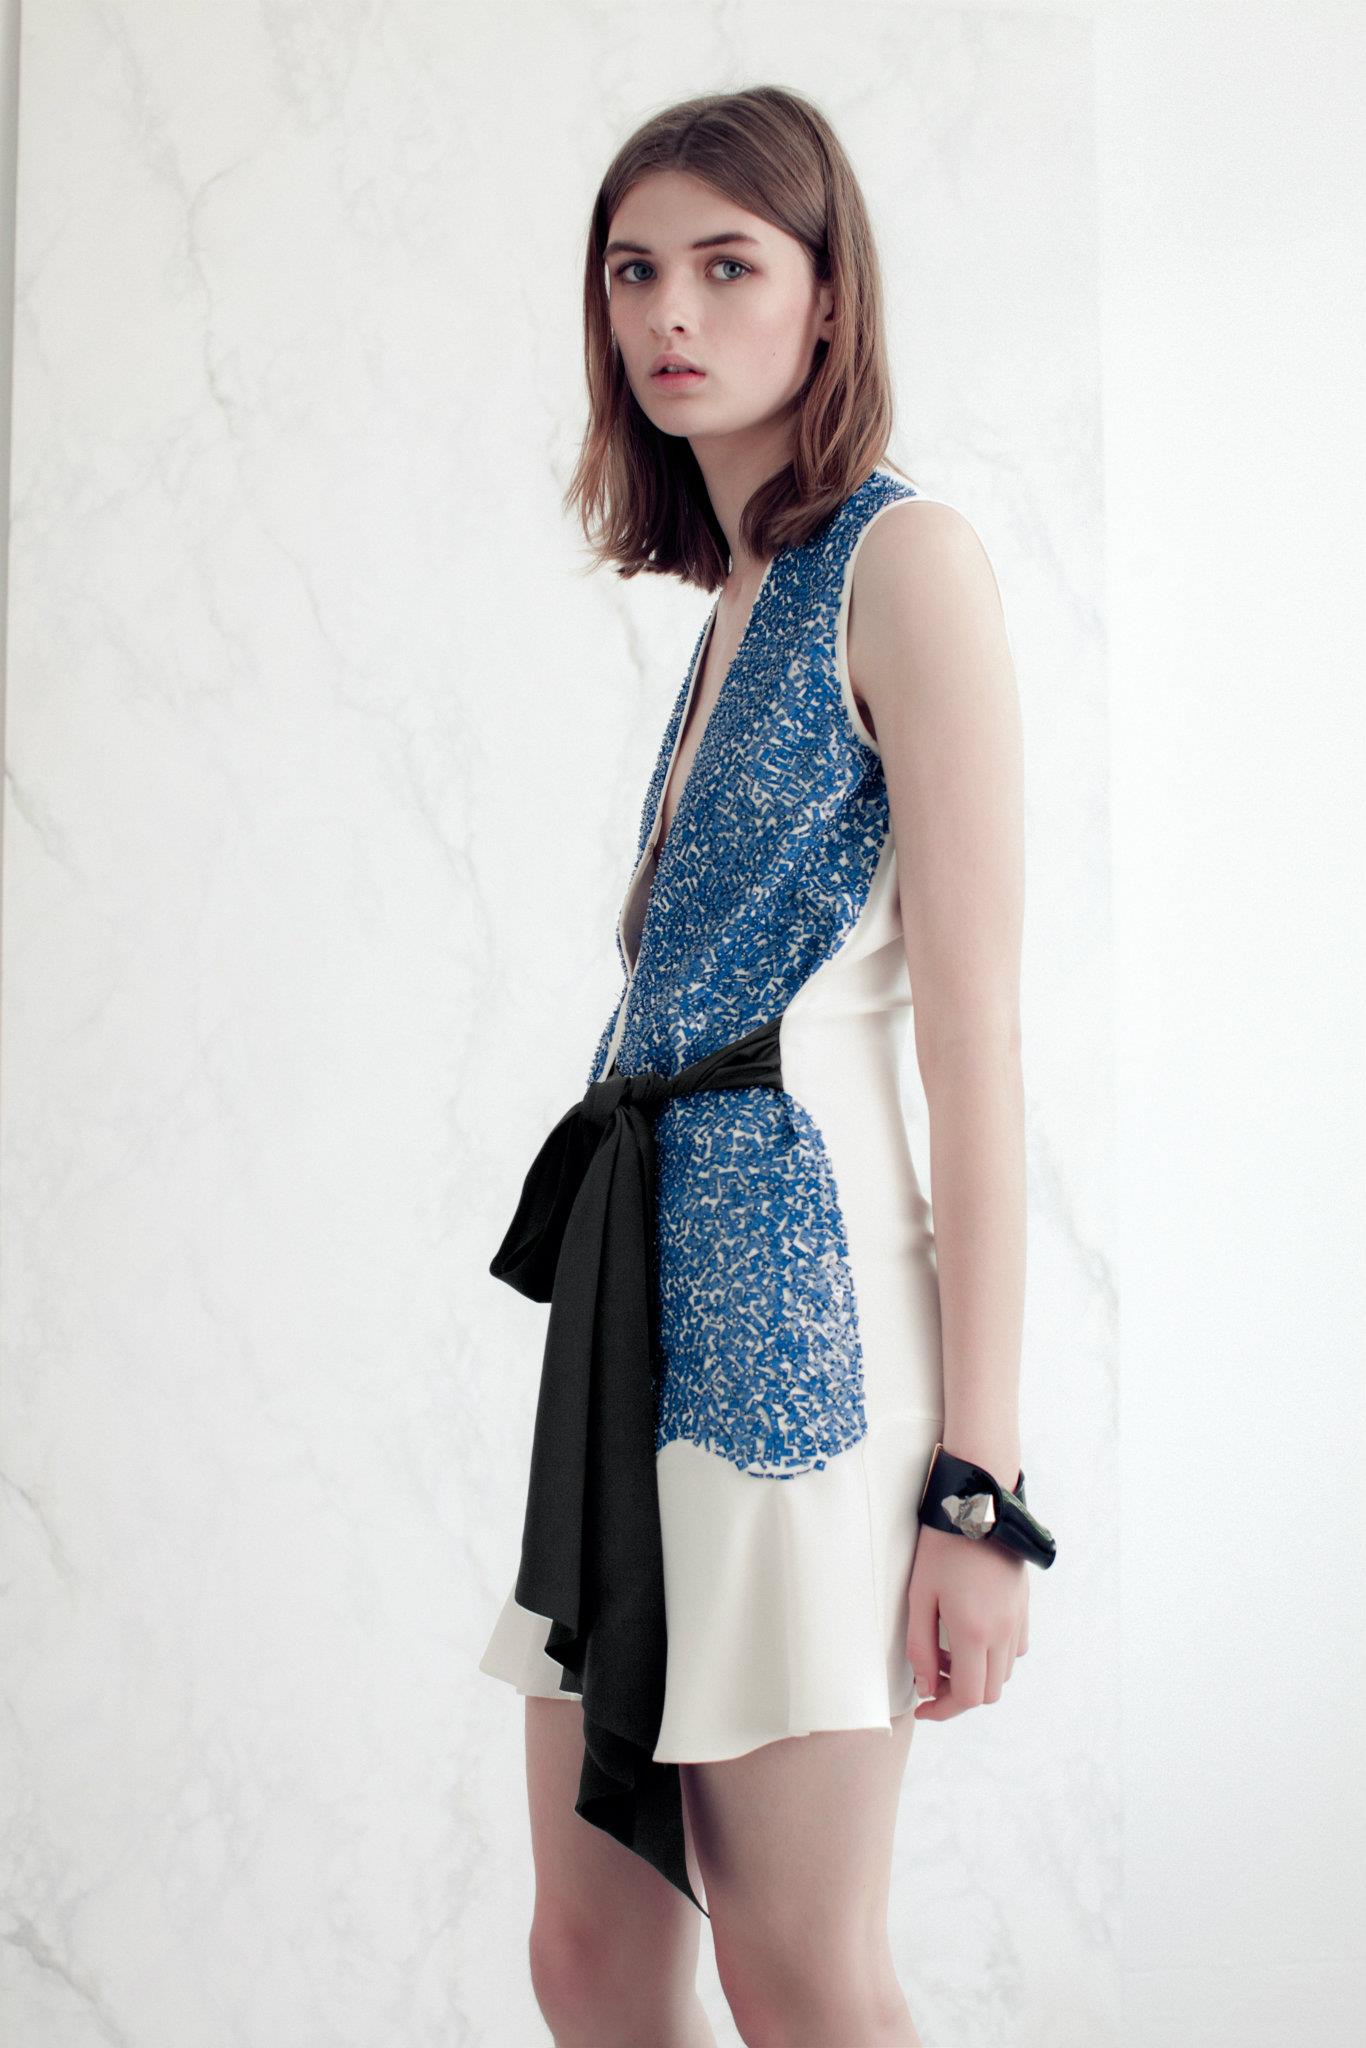 Vionnet Spring 2013 Collection 6